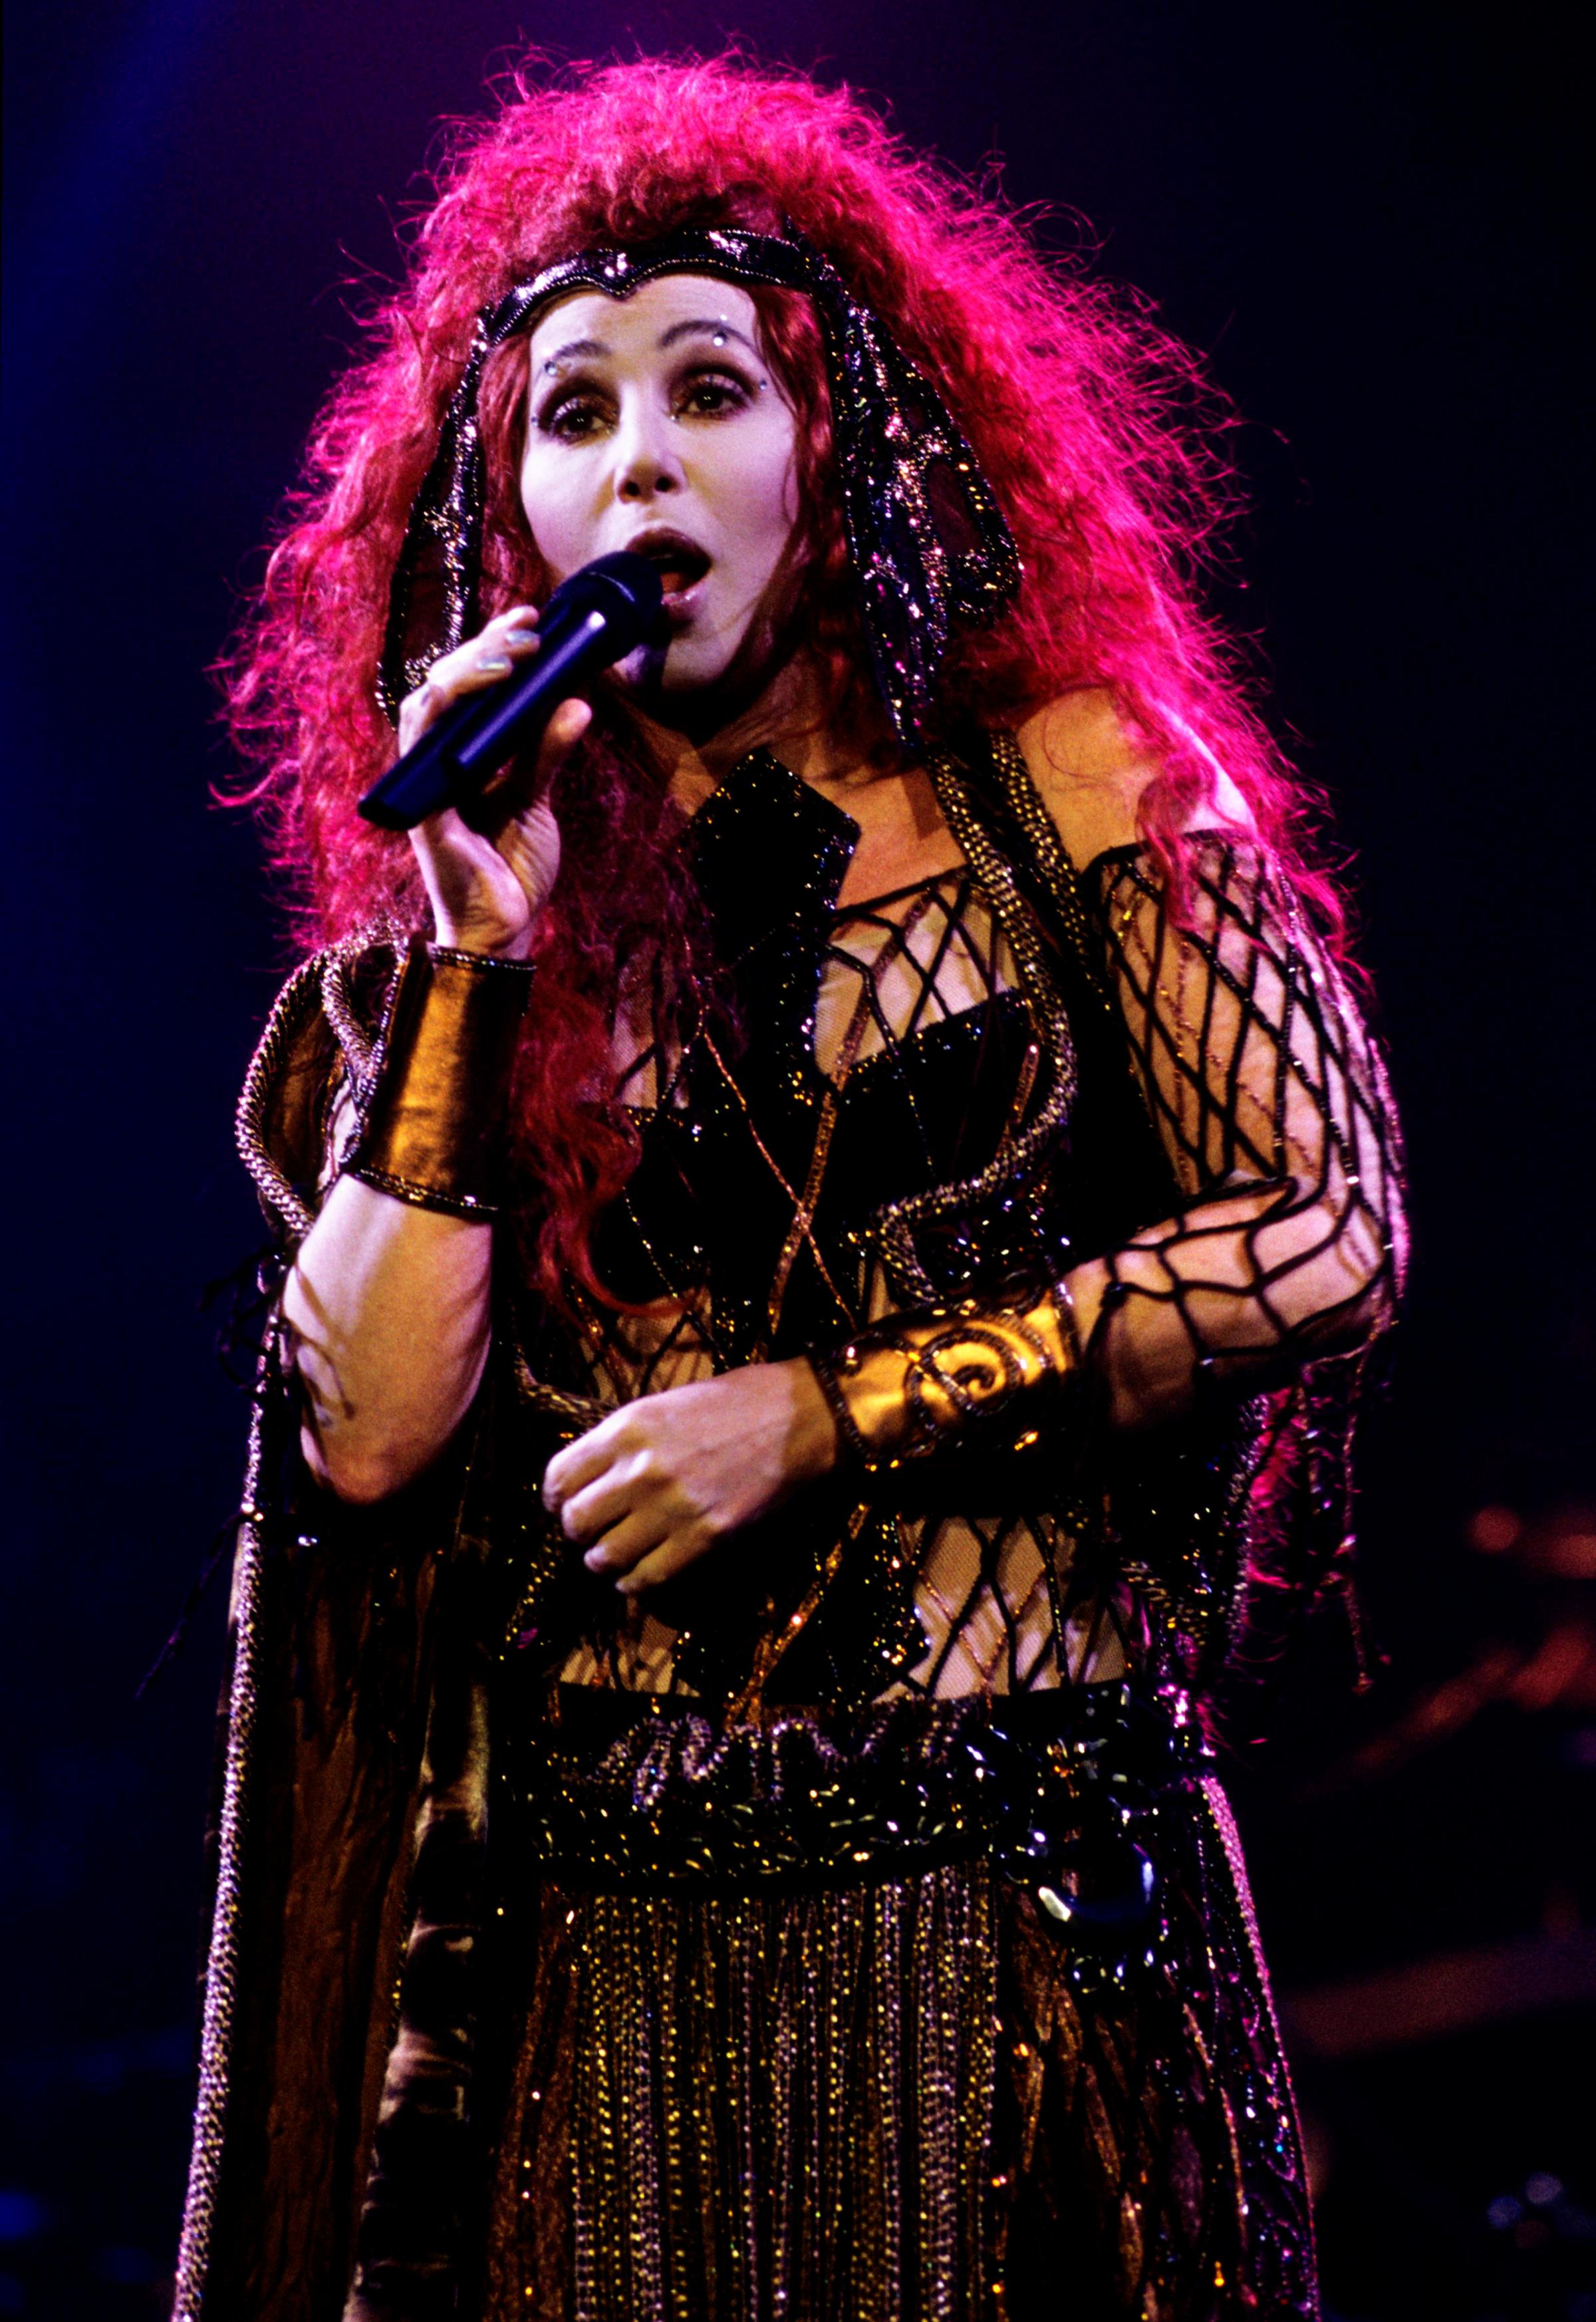 Cher performs during her "Do You Believe?" tour in the U.K. in 1999.